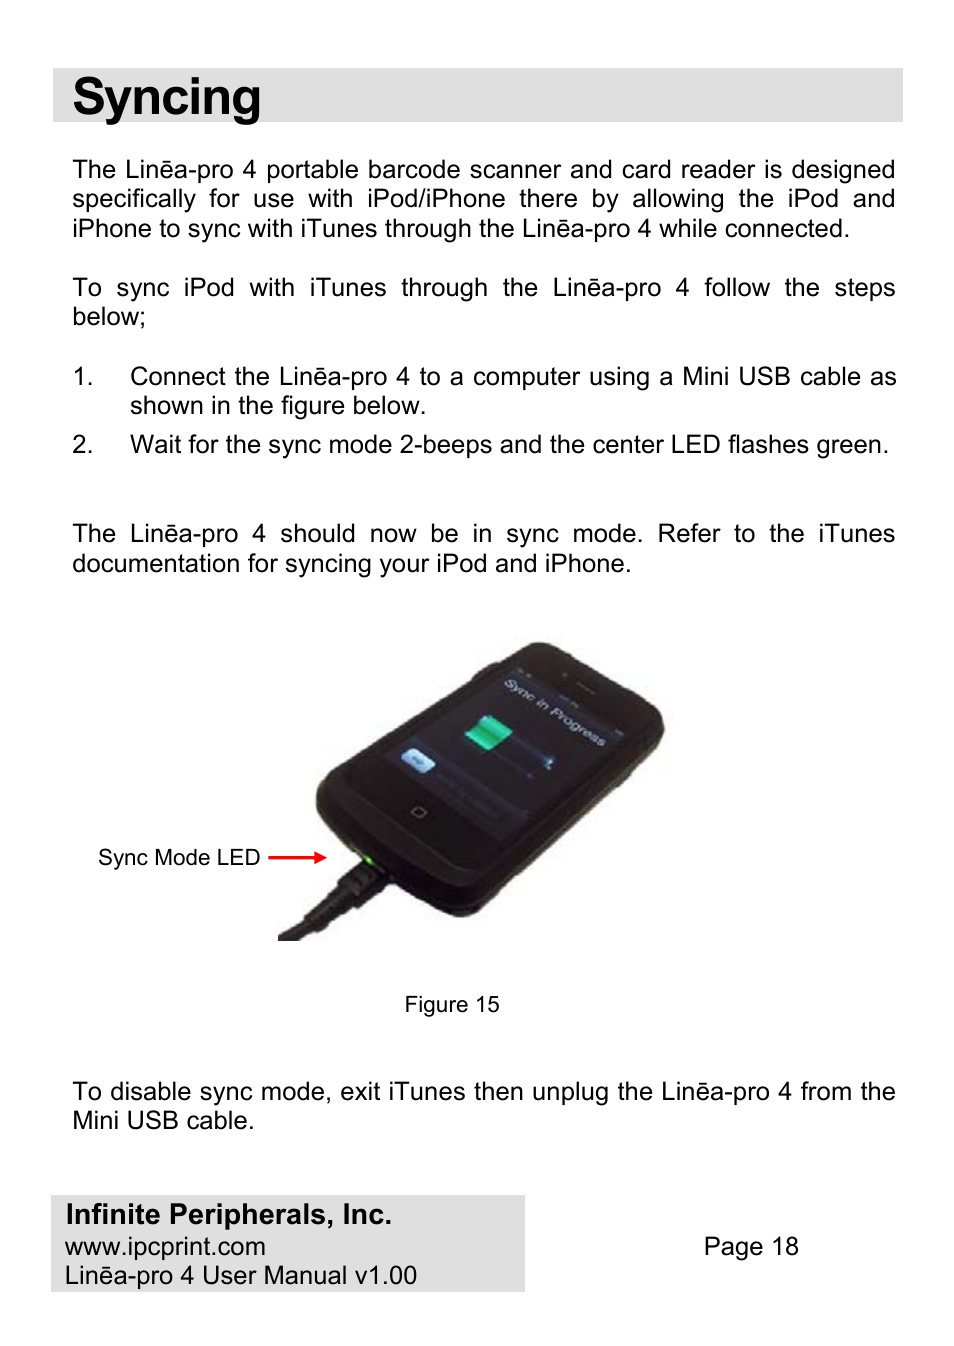 Syncing | Infinite Peripherals PRO 4 User Manual | Page 18 / 24